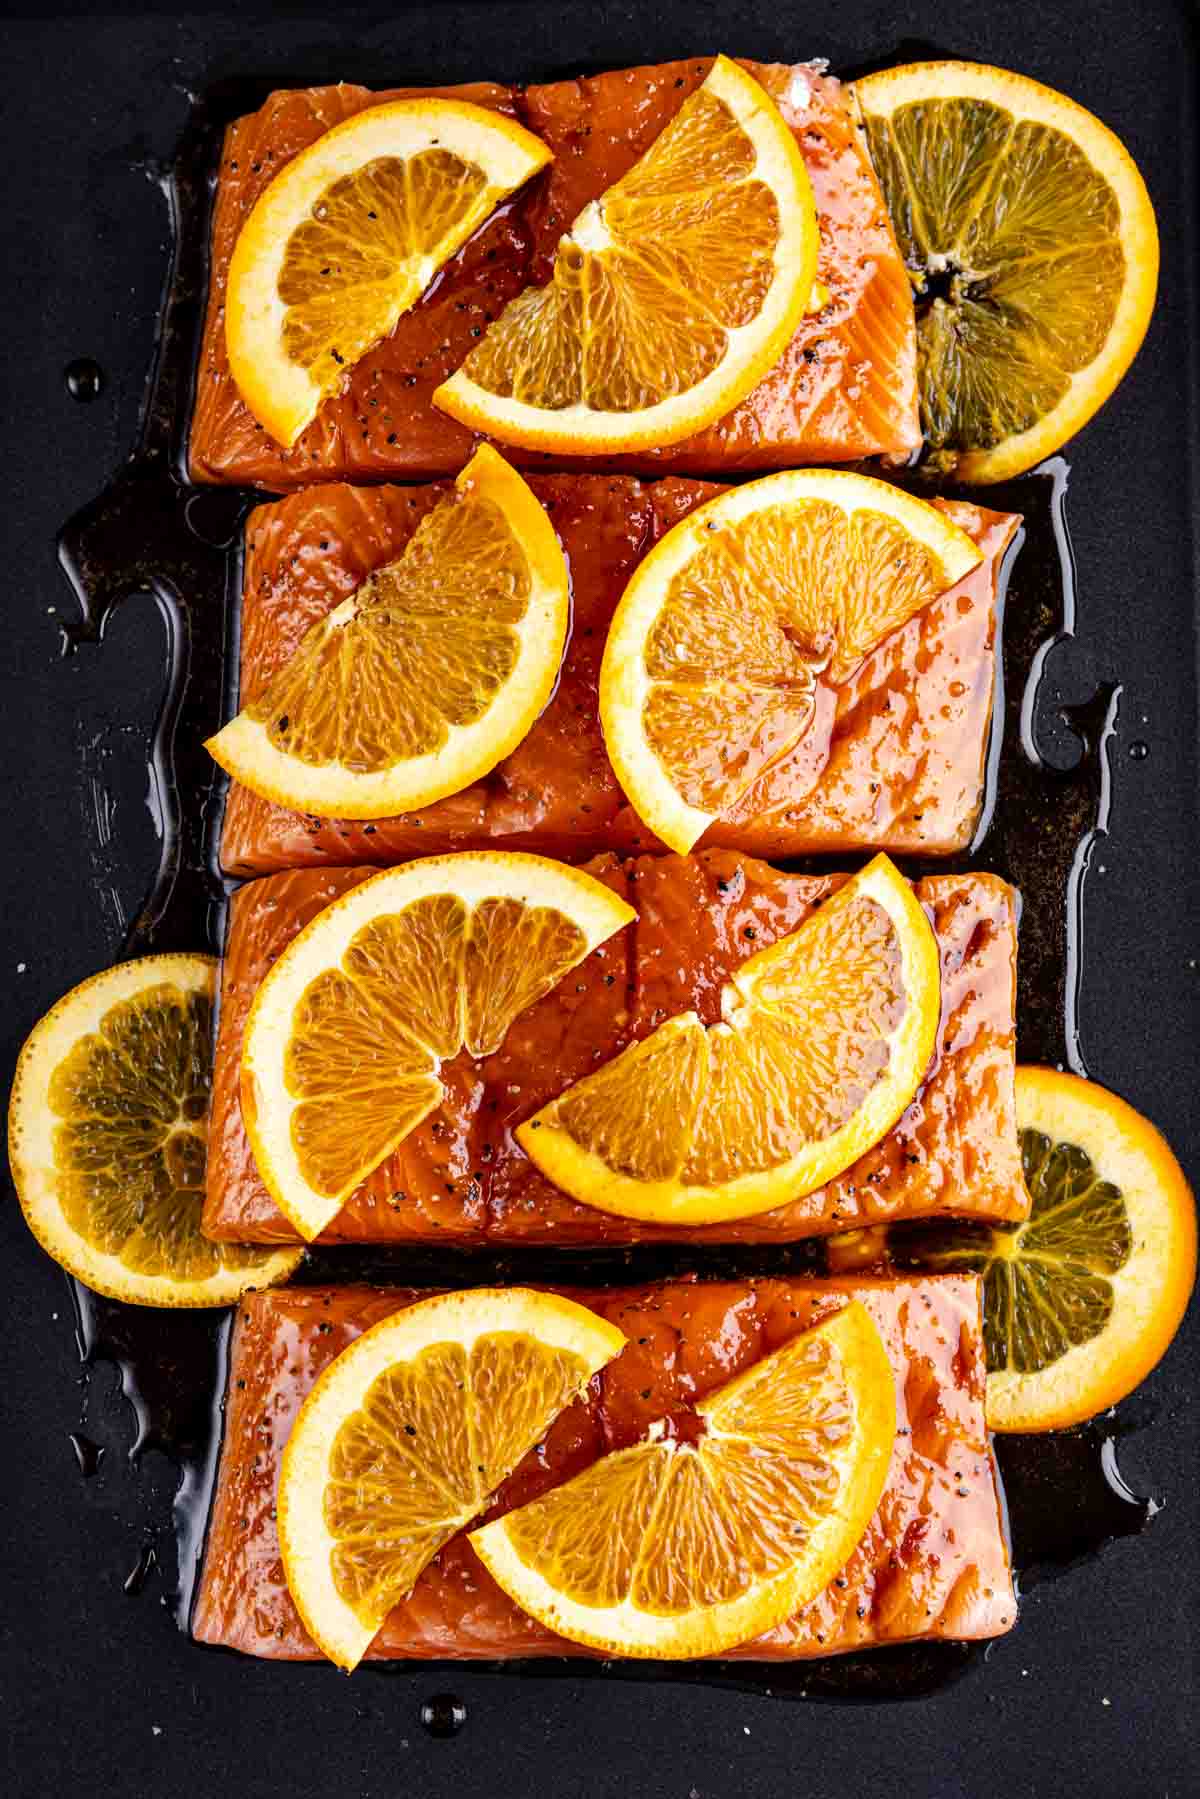 Orange-glazed salmon fillets ready for cooking.